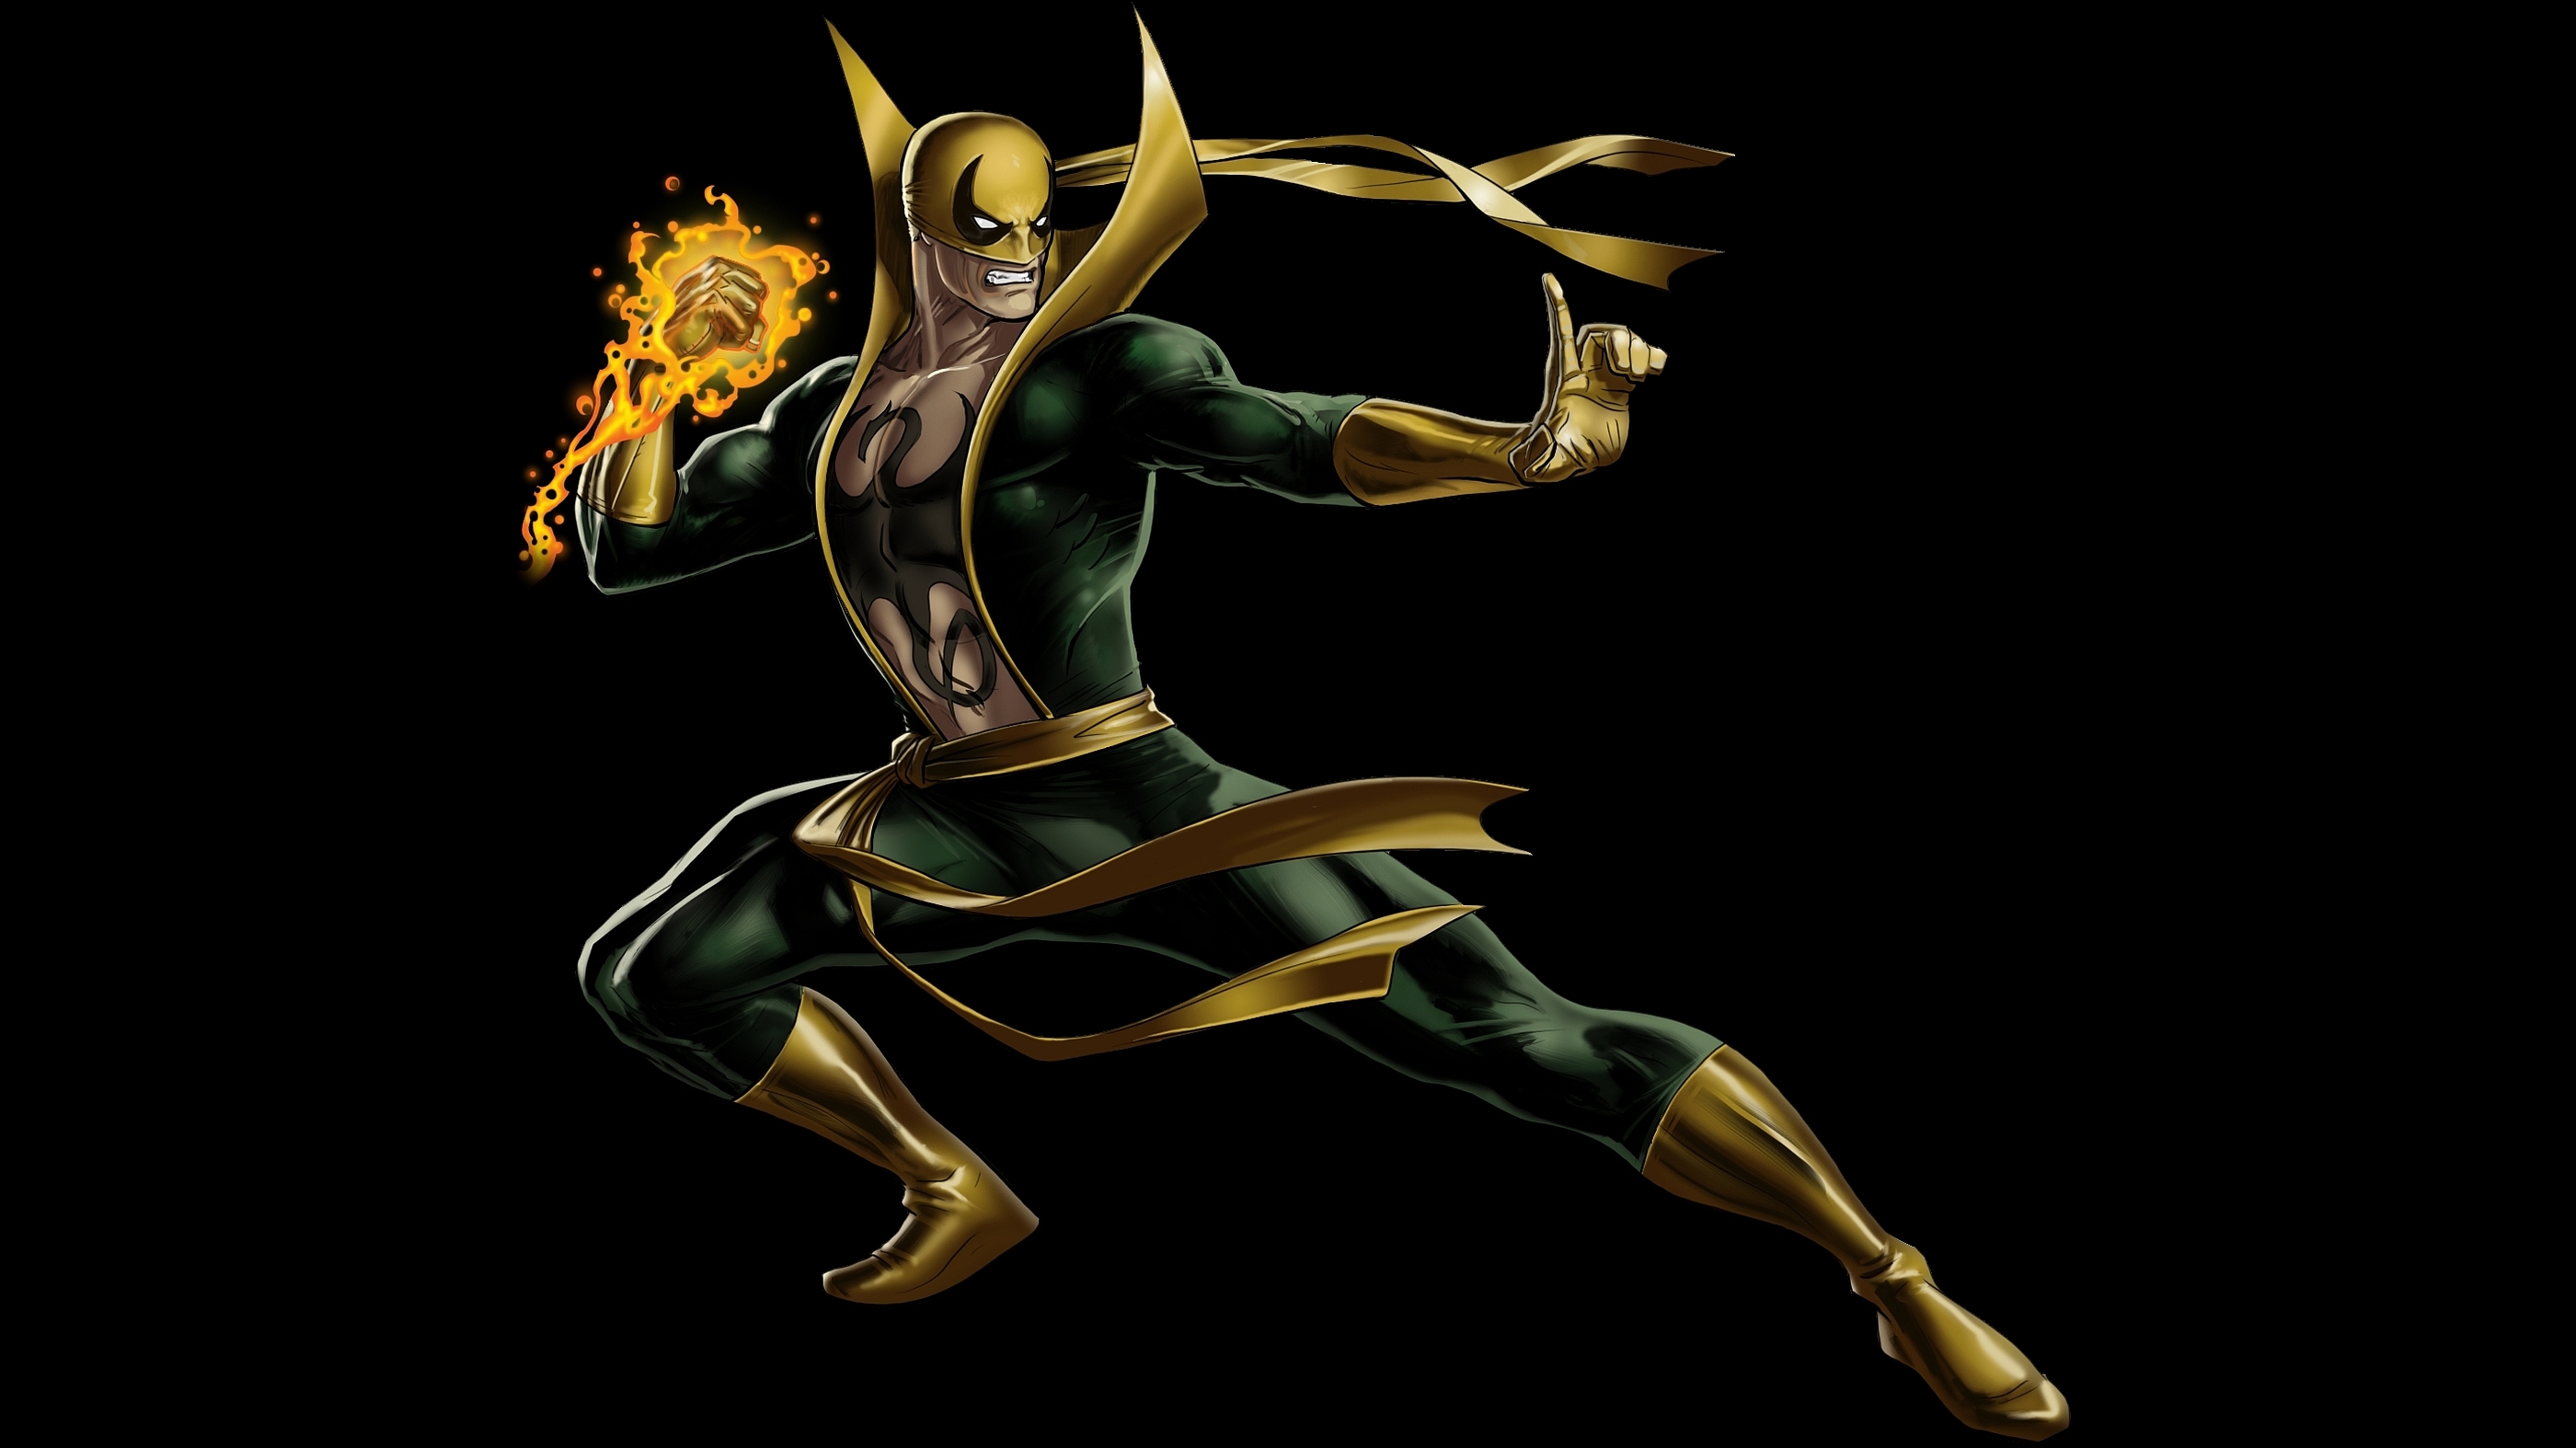 70+ Iron Fist (Marvel Comics) HD Wallpapers and Backgrounds